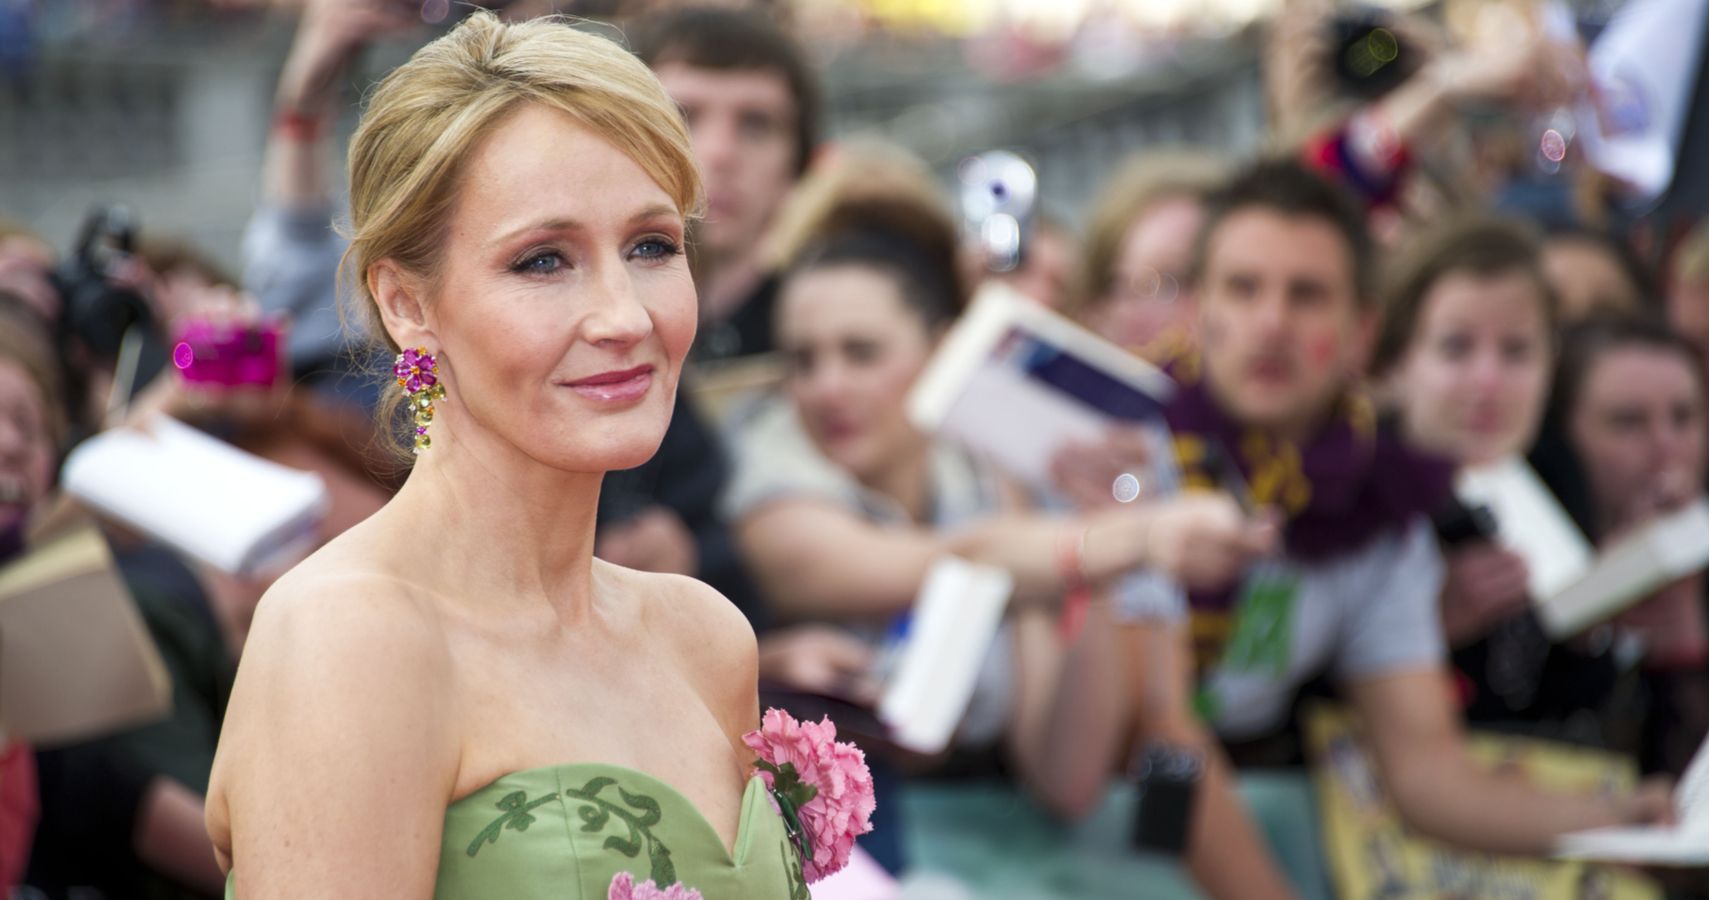 JK Rowling's £2.2 Million Home That Inspired 'Harry Potter'